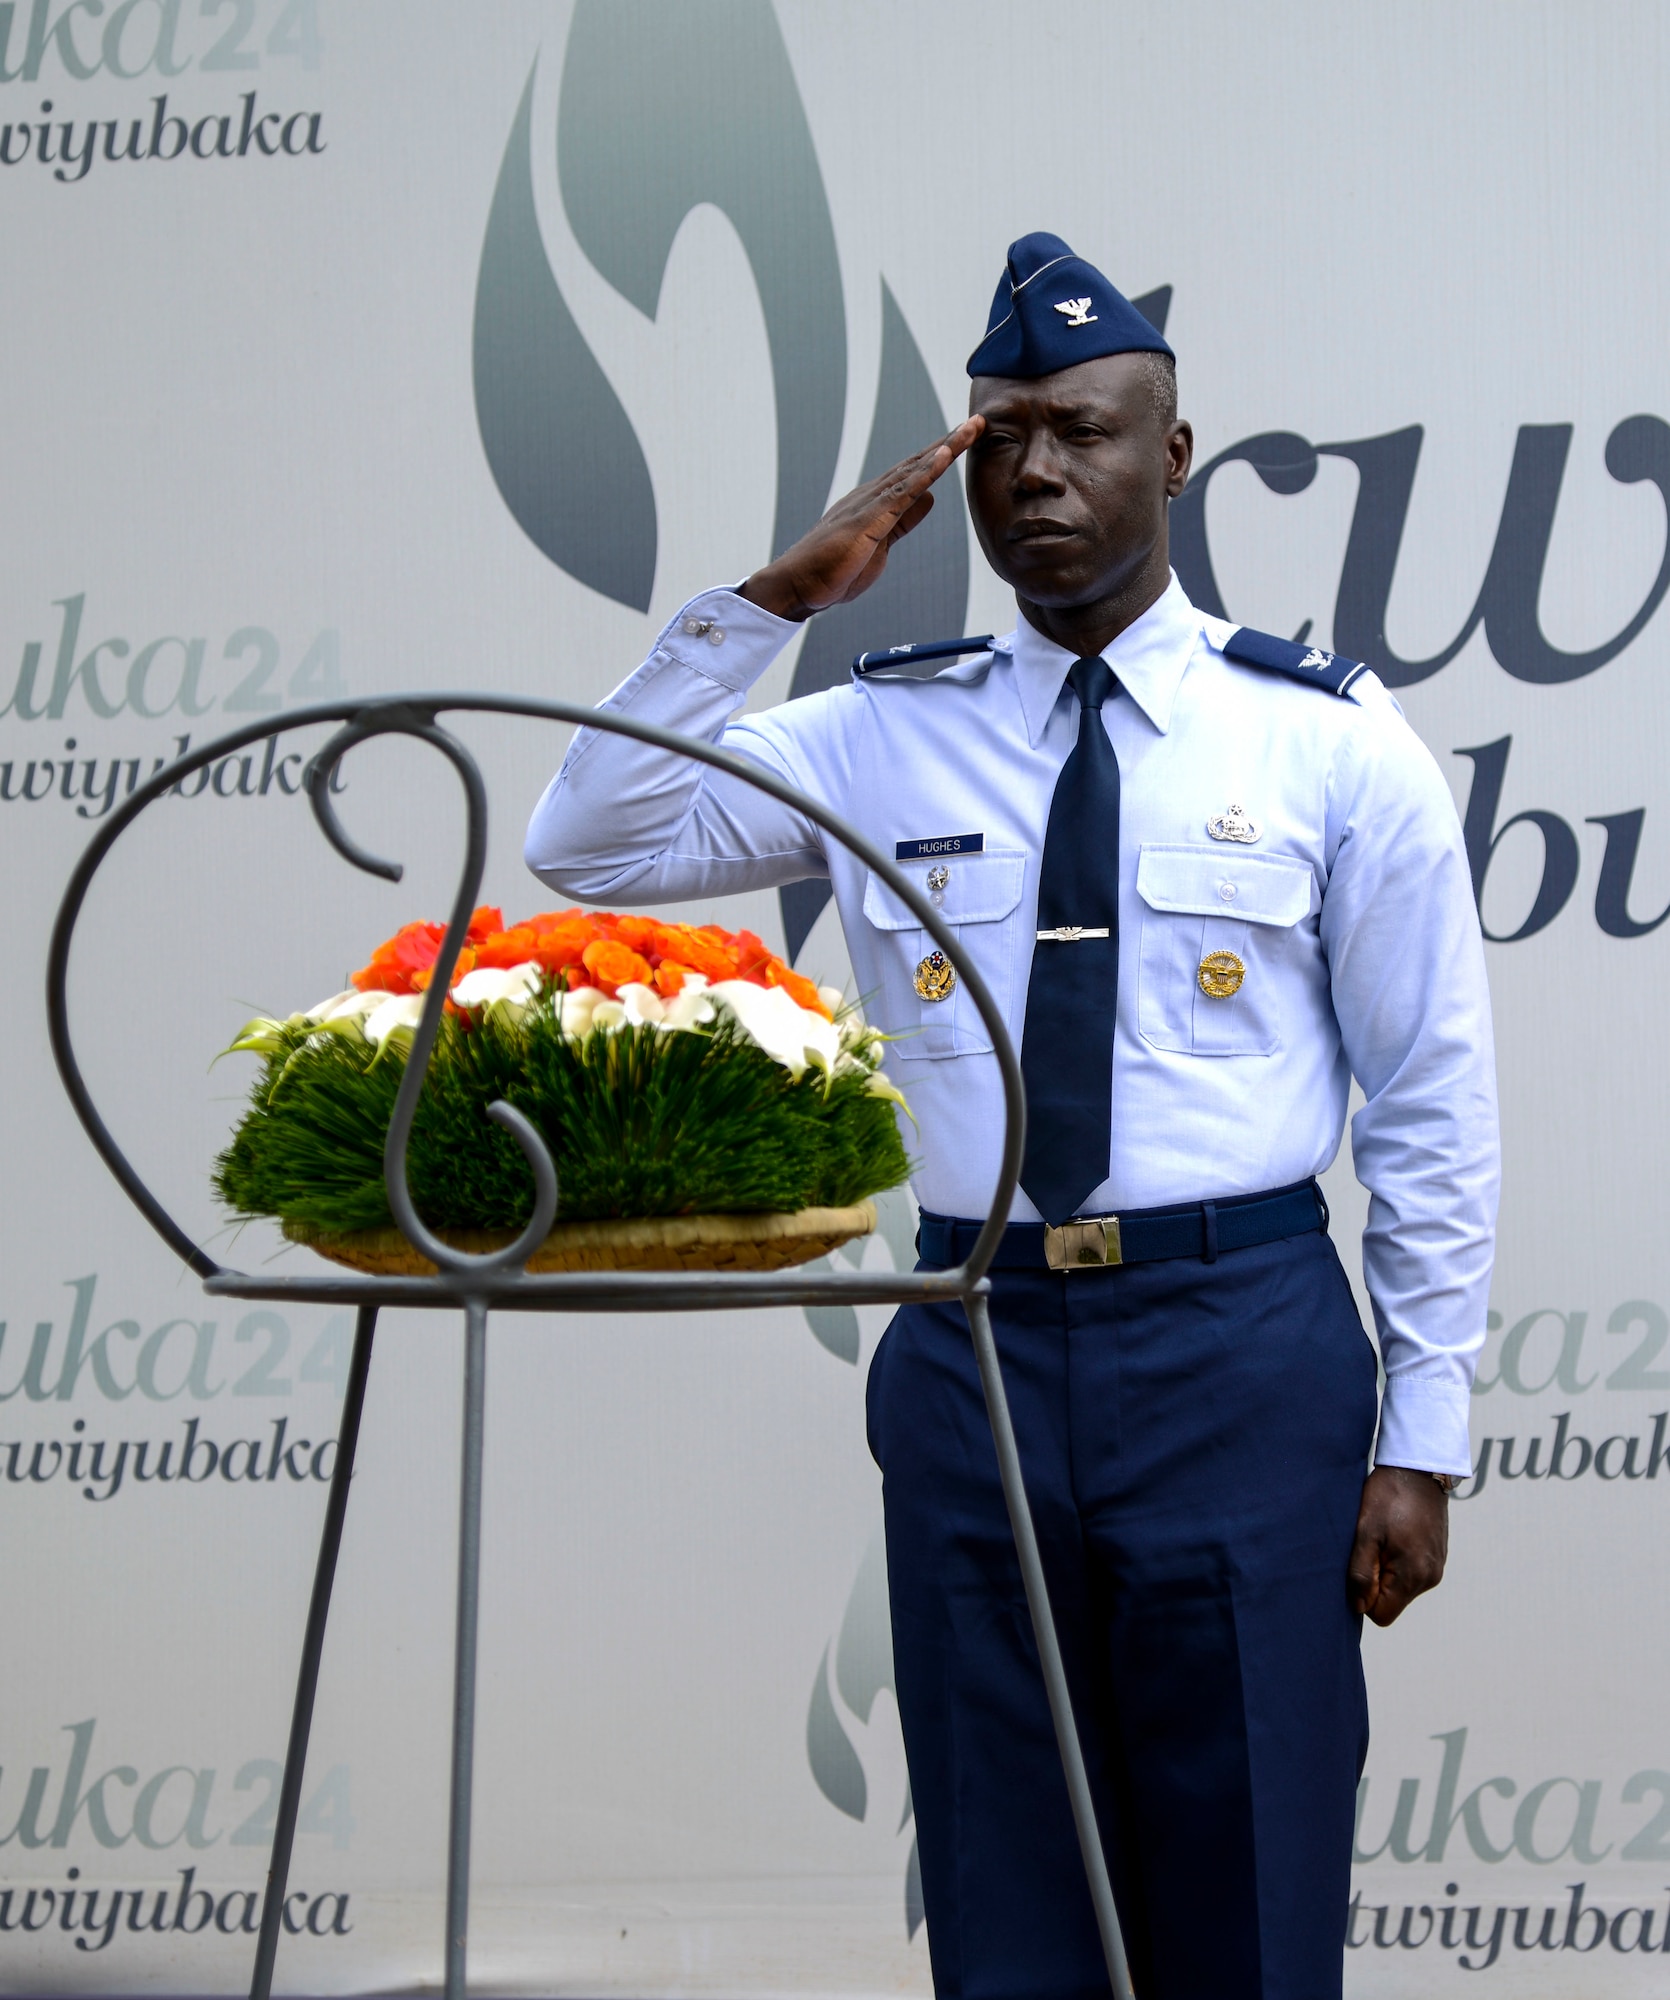 U.S. Air Force Col. Stephen Hughes, deputy director of U.S. Air Forces in Europe-Air Forces Africa Plans, Programs, and Analysis, renders a salute during a wreath laying ceremony at the Kigali Genocide Memorial in Kigali, Rwanda, March 4, 2019. Hughes and air force delegates participating in the African Partnership Flight Rwanda visited the memorial as part of a cultural visit. (U.S. Air Force photo by Tech. Sgt. Timothy Moore)